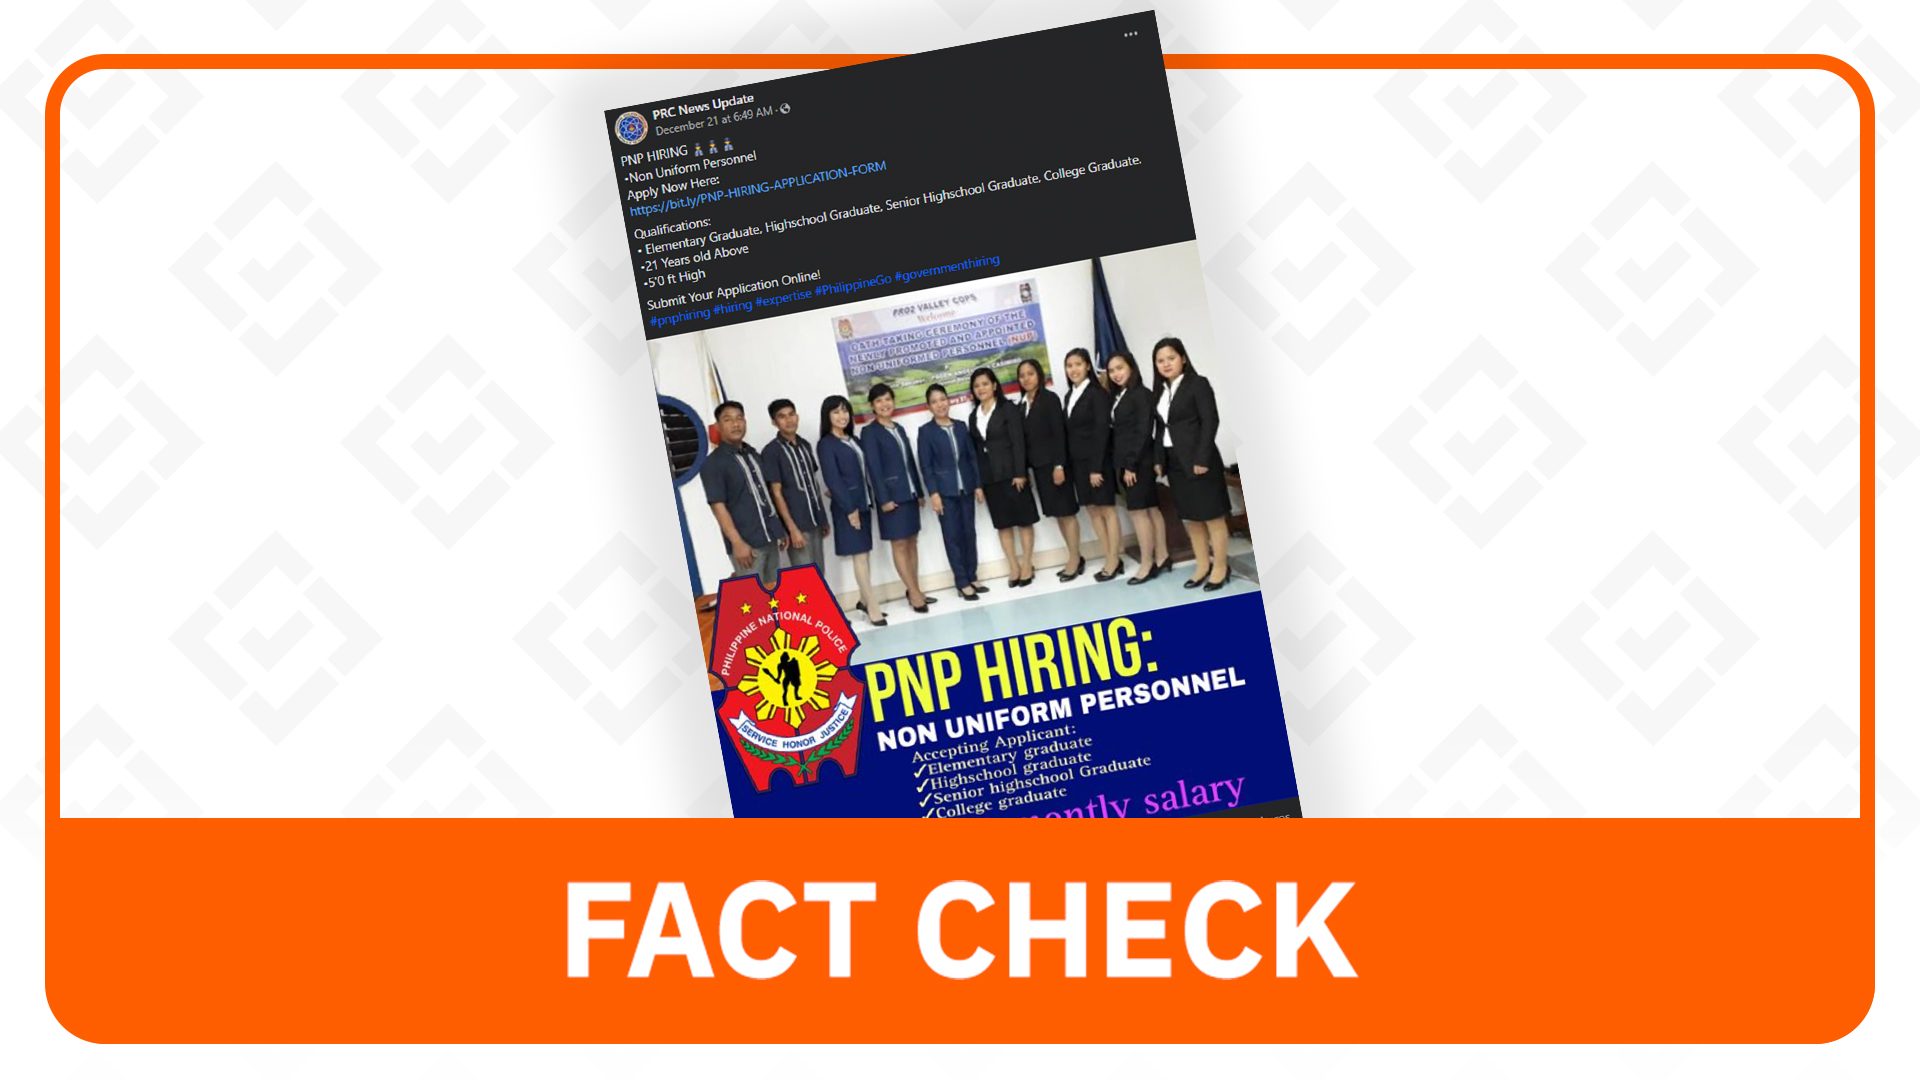 FACT CHECK: Link for ‘PNP Non-Uniformed Personnel’ application is fake